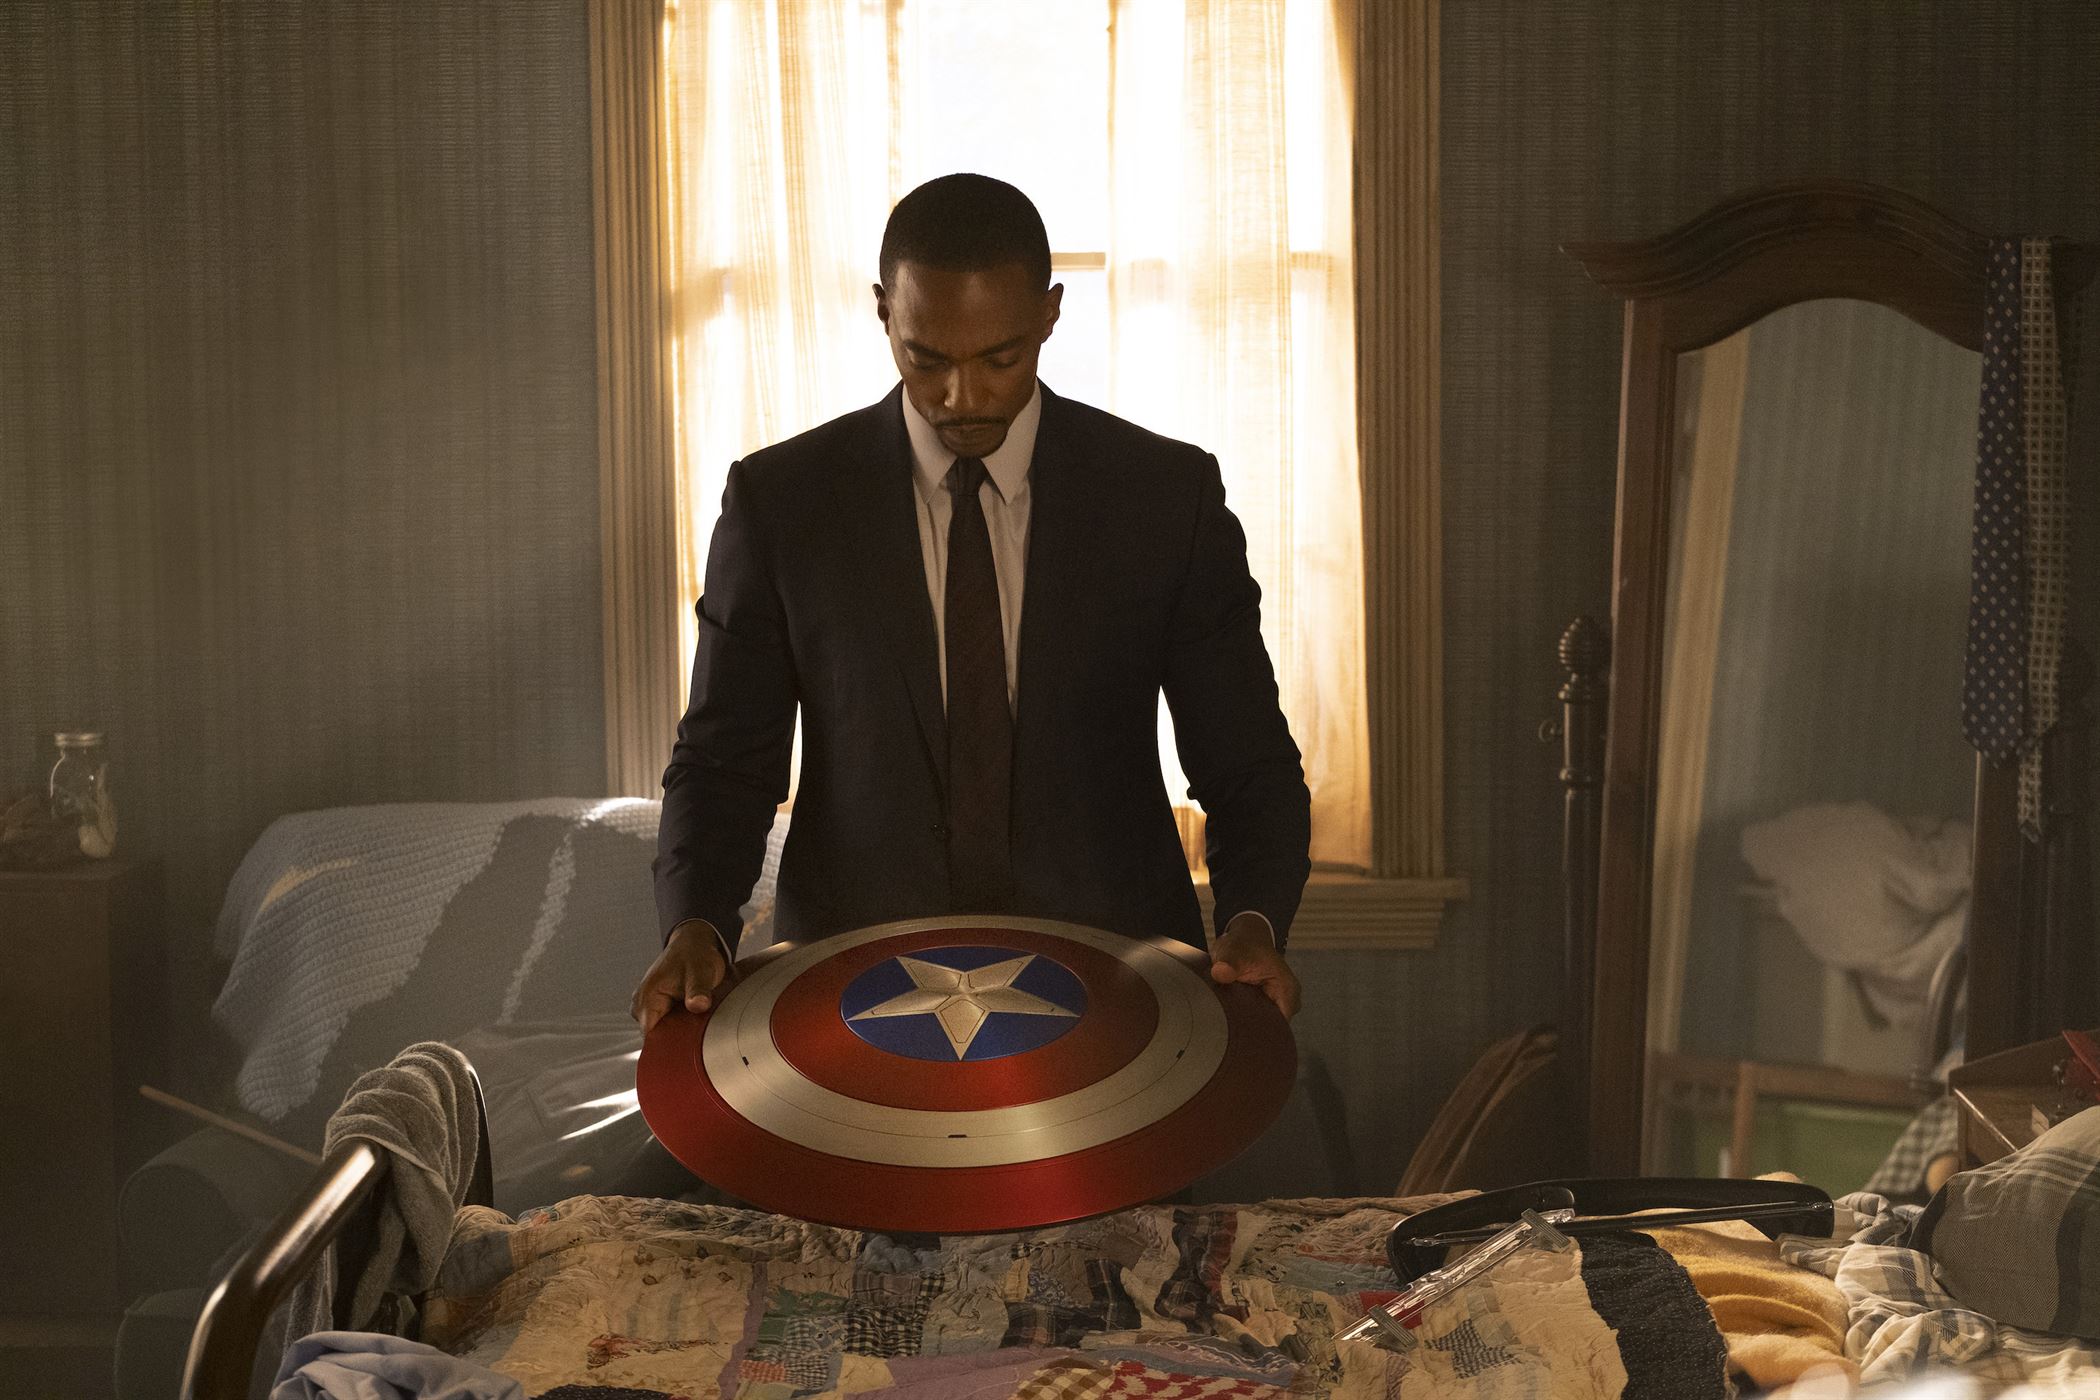 Anthony Mackie plays Sam Wilson, or Falcon, and inherits the Captain America role. Photo courtesy of Marvel Studios